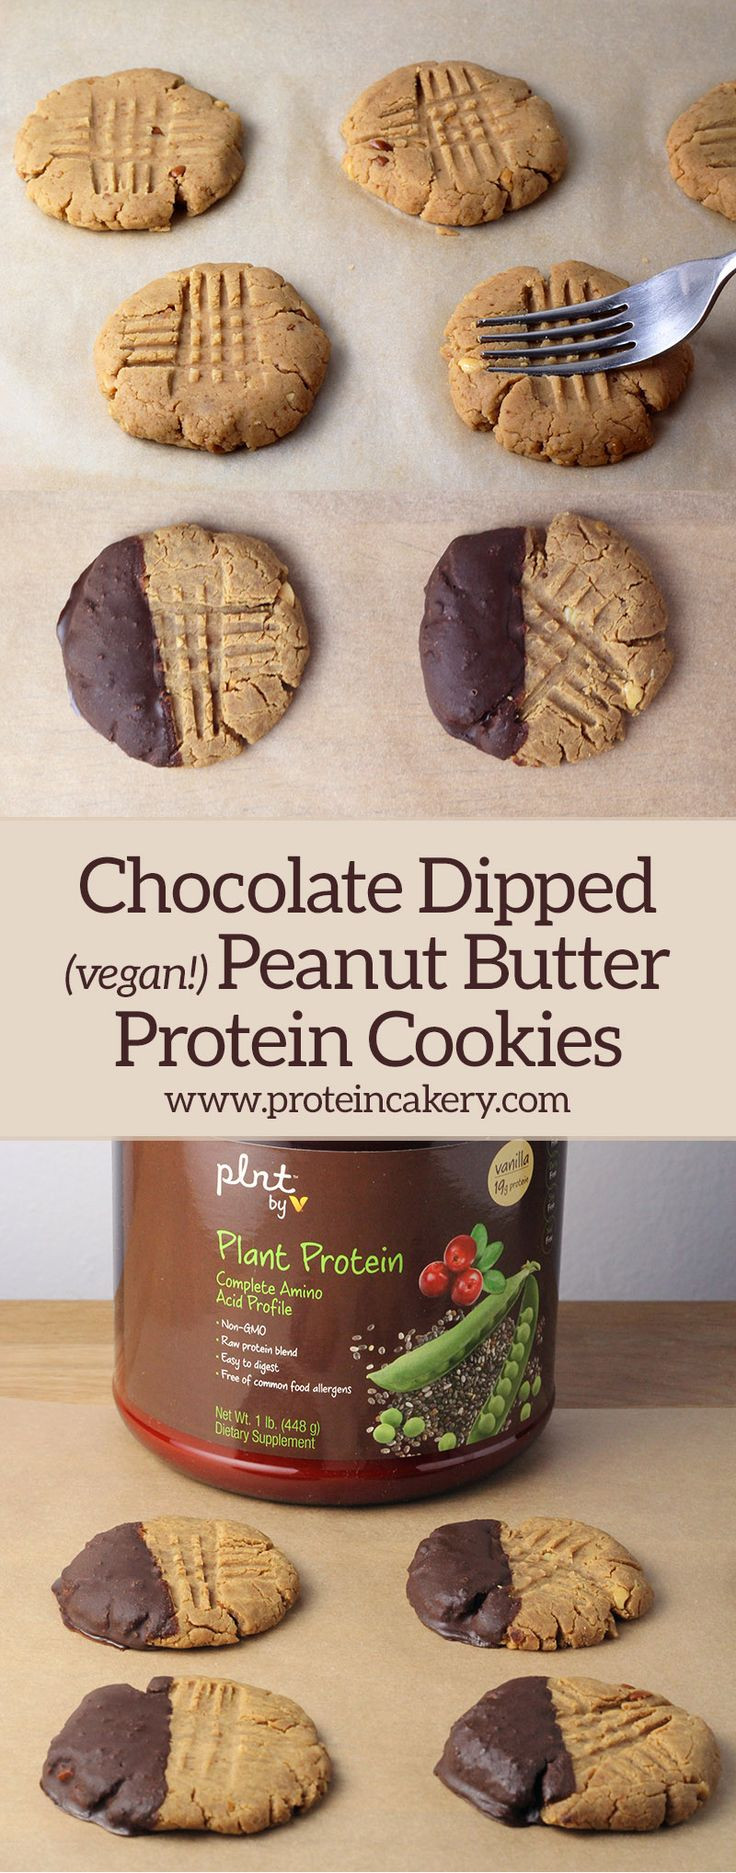 Peanut Butter Protein Cookies Low Carb
 Best 20 Protein Powder Cookies ideas on Pinterest